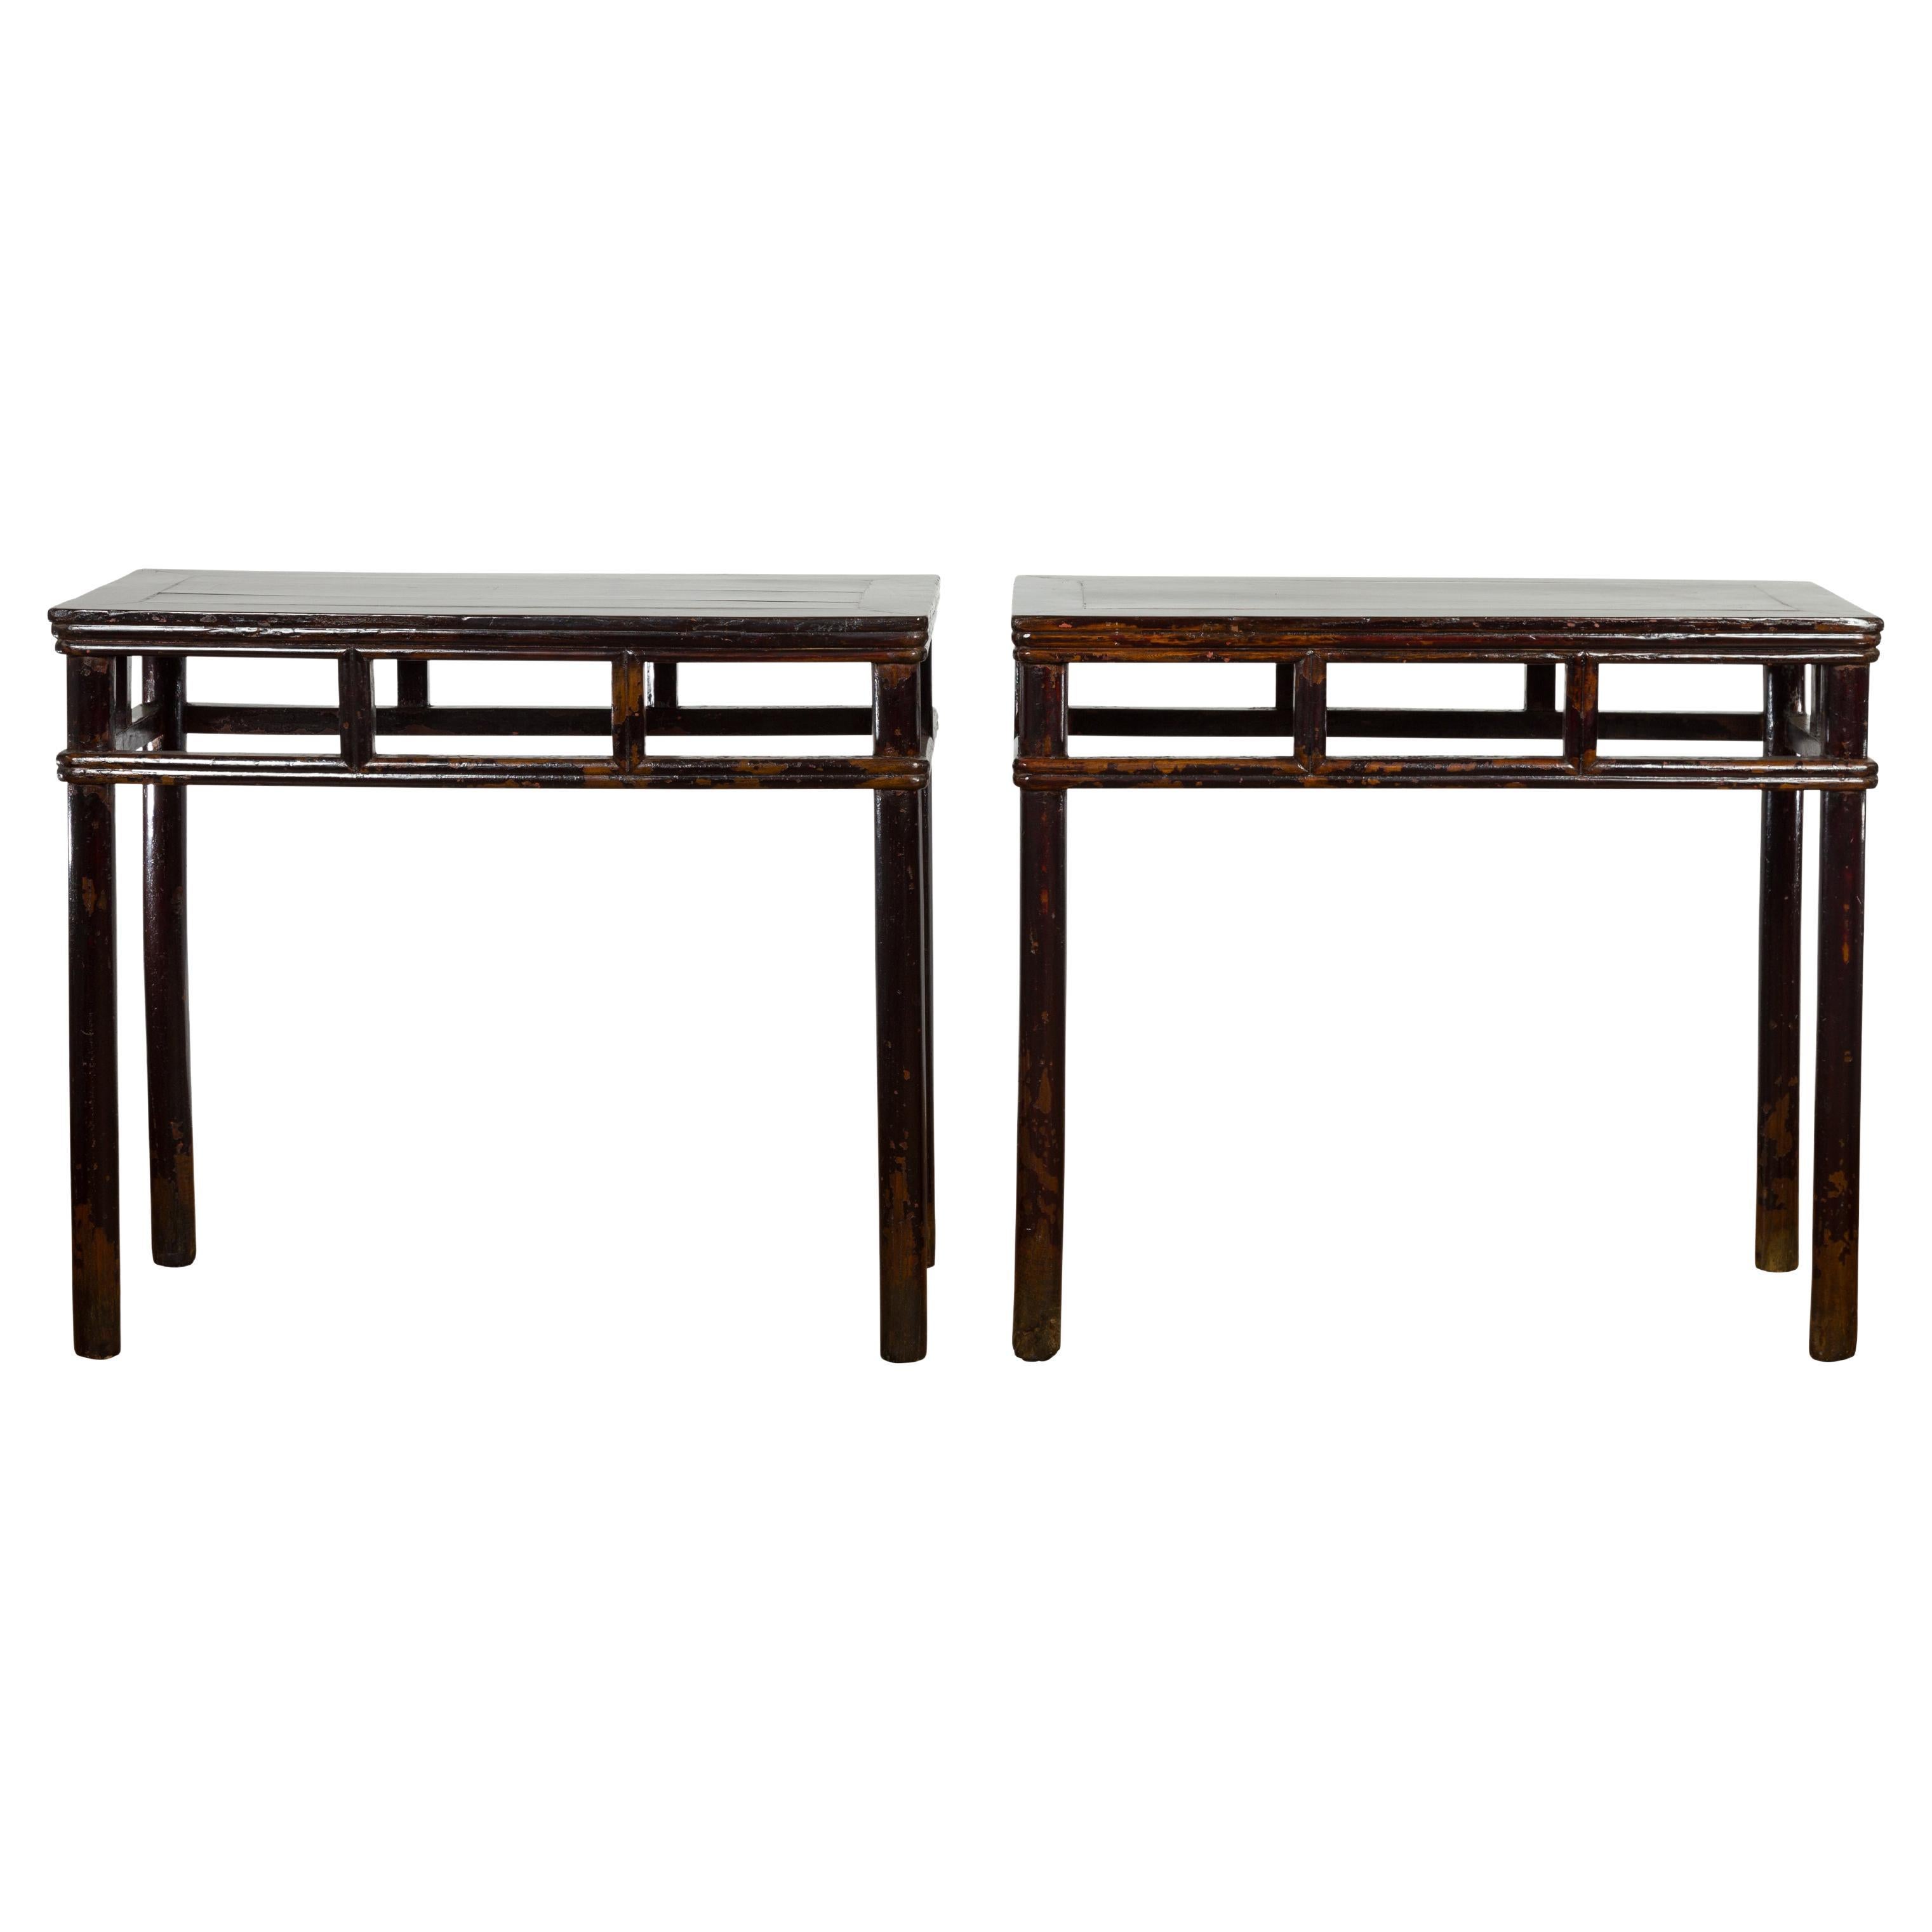 Pair of Chinese Late Qing Dynasty Wine Console Tables with Black Brown Lacquer